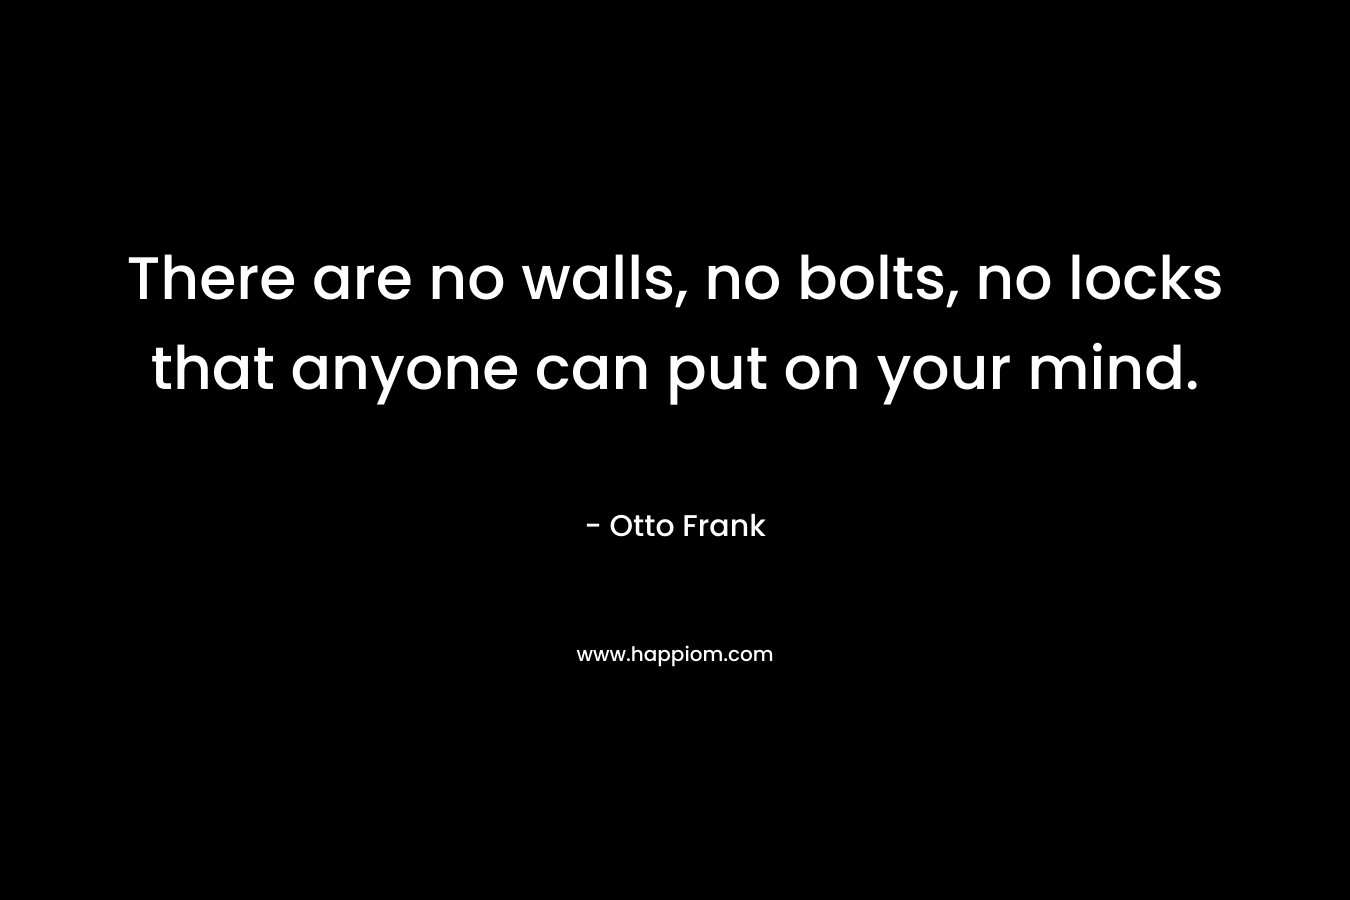 There are no walls, no bolts, no locks that anyone can put on your mind. – Otto Frank